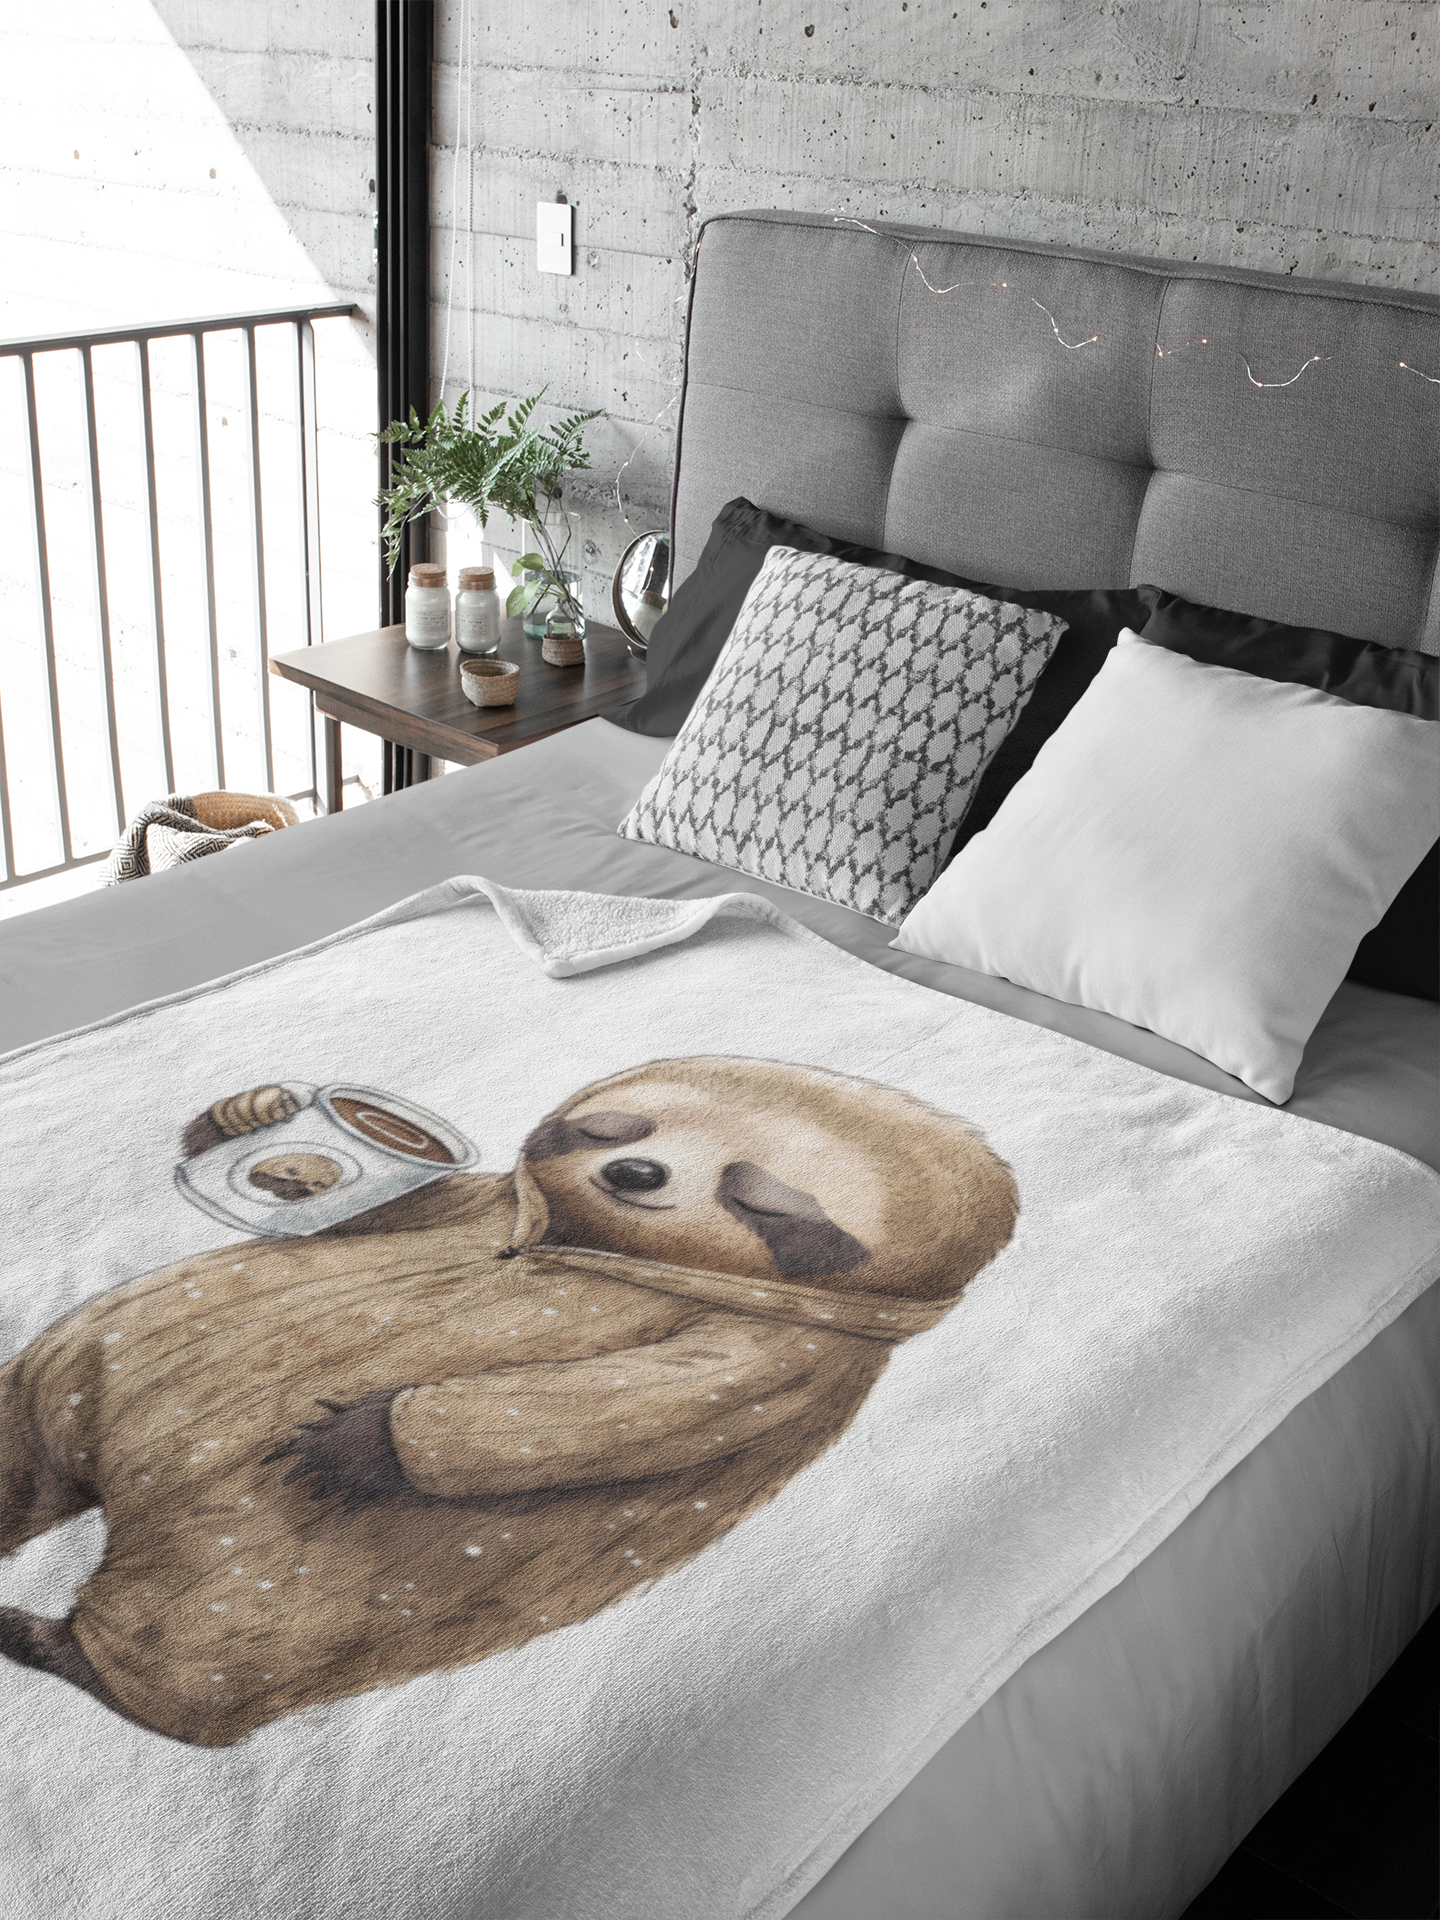 Sleepy Sloth 100% Polyester Soft Silk Touch Fabric Throw Blanket - Cozy, Durable and Adorable